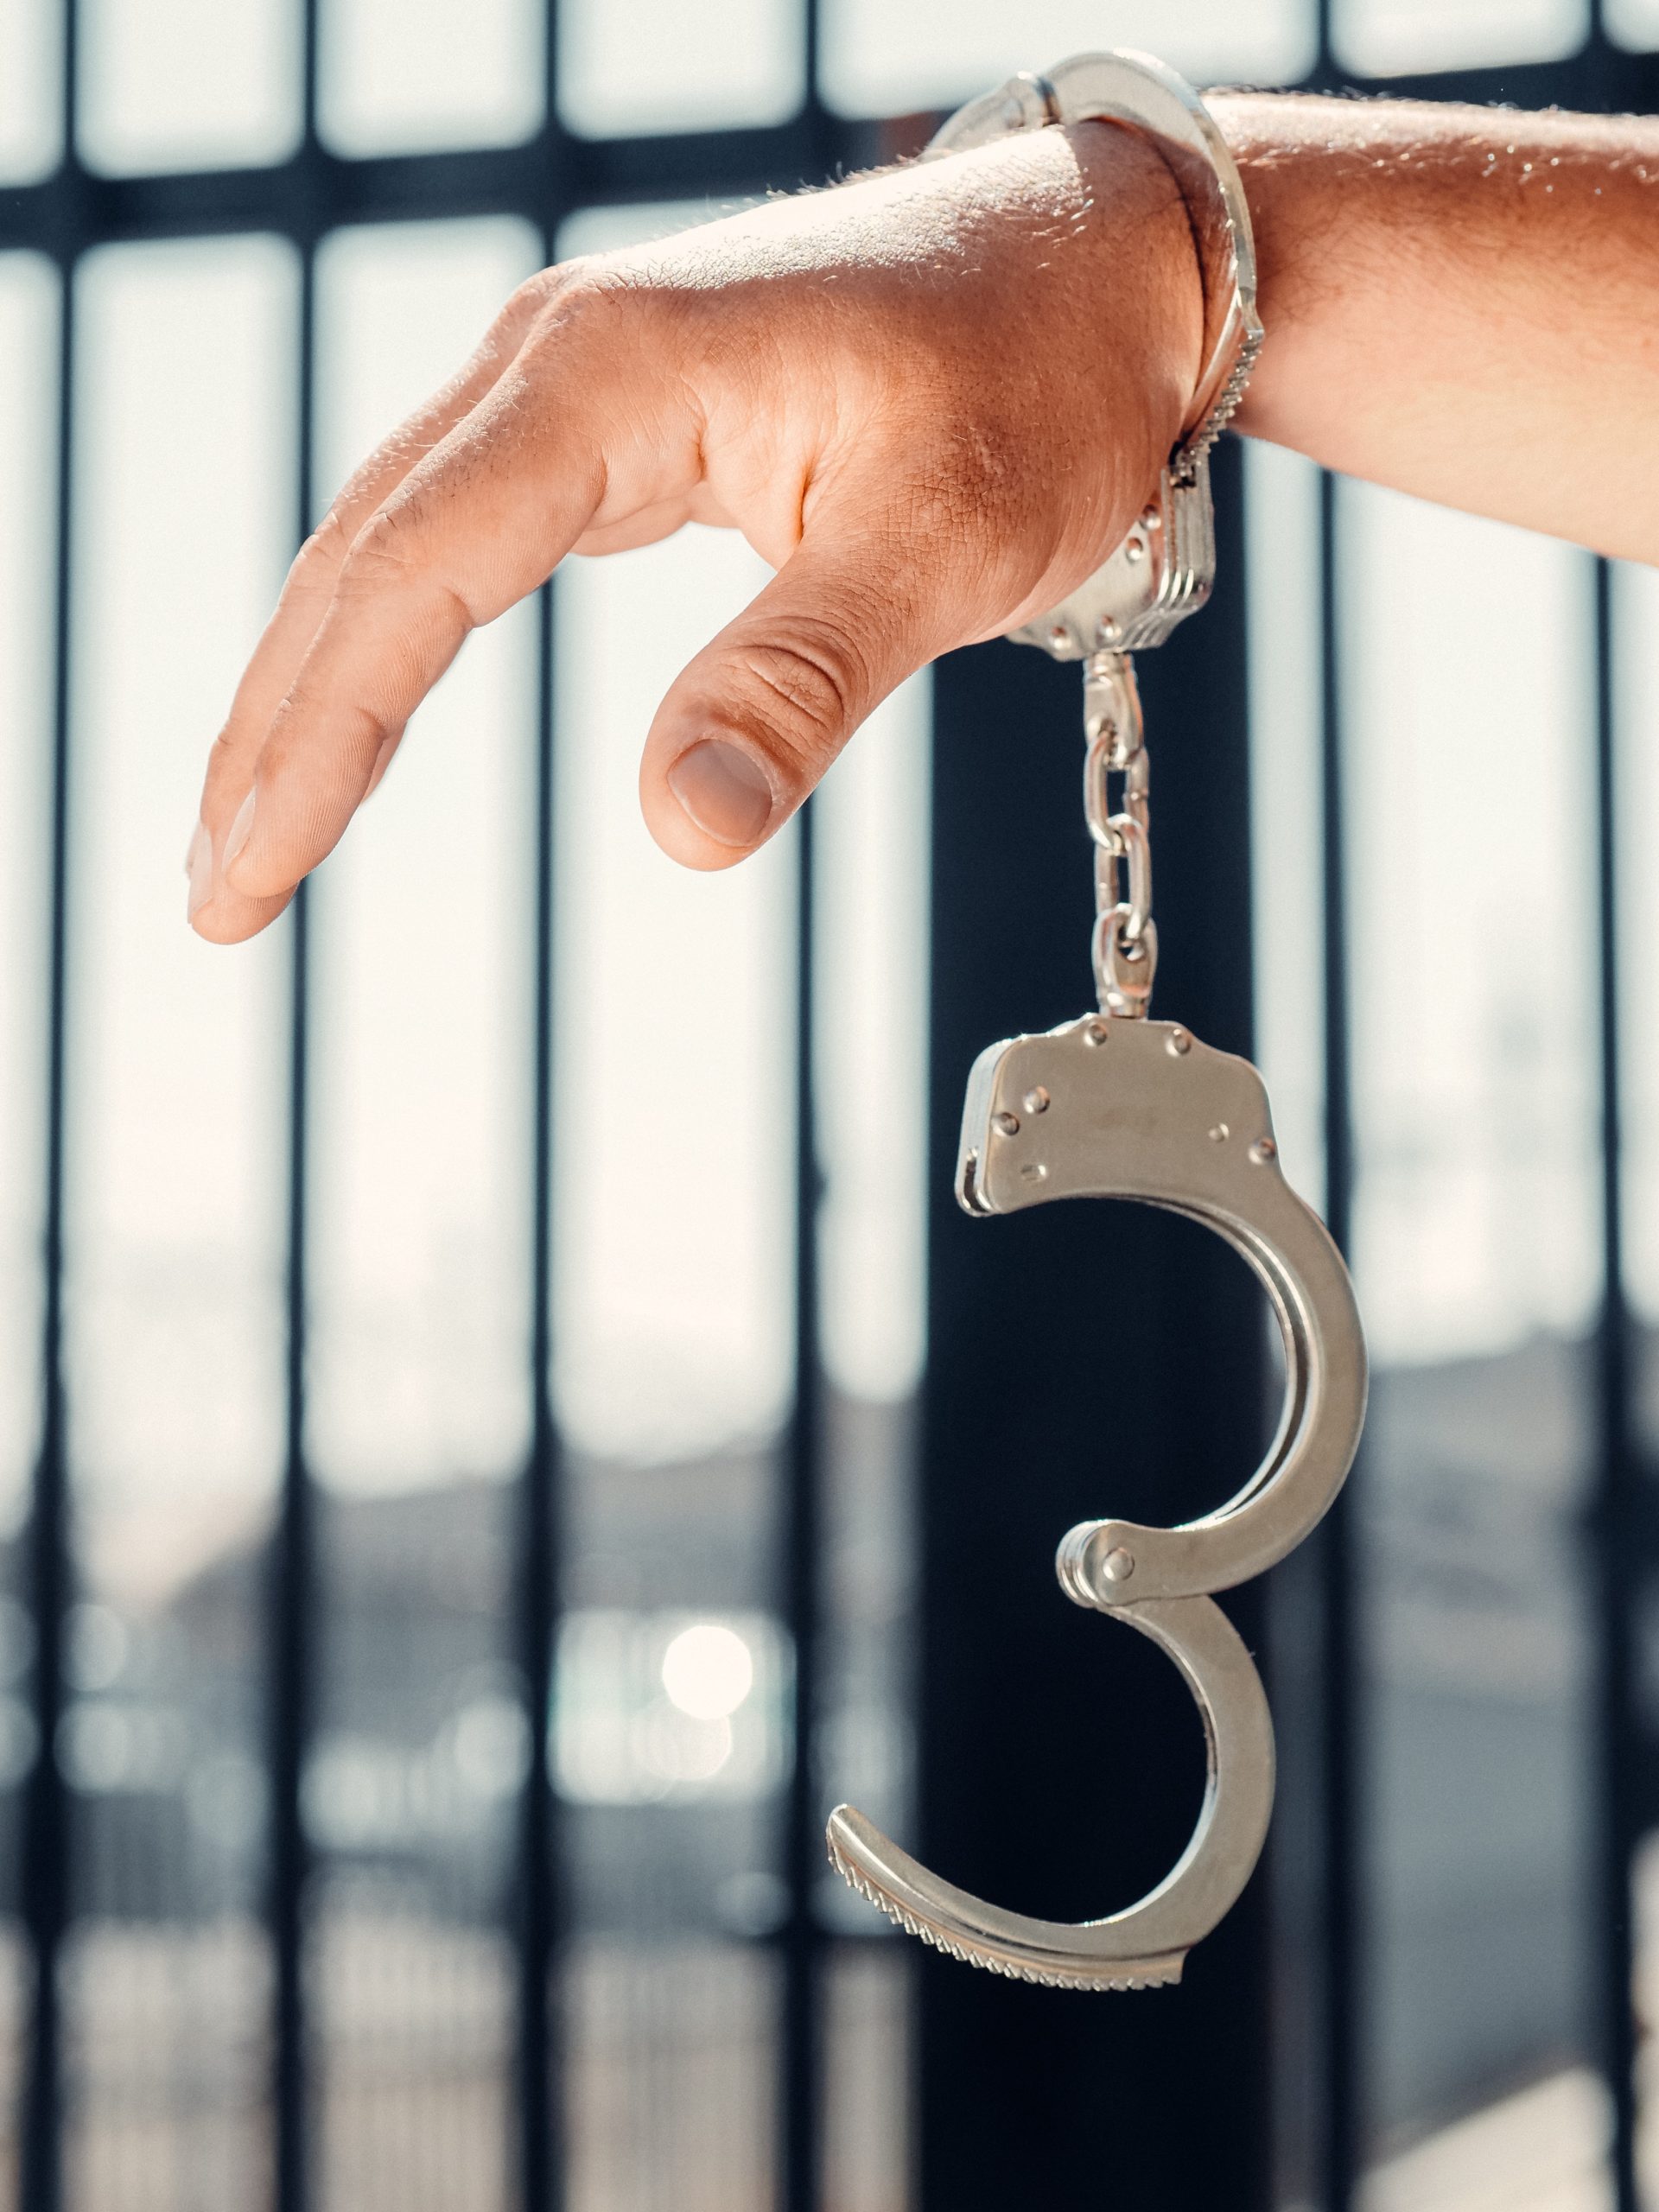 What Rights Could I Lose Following A Criminal Conviction In Virginia?